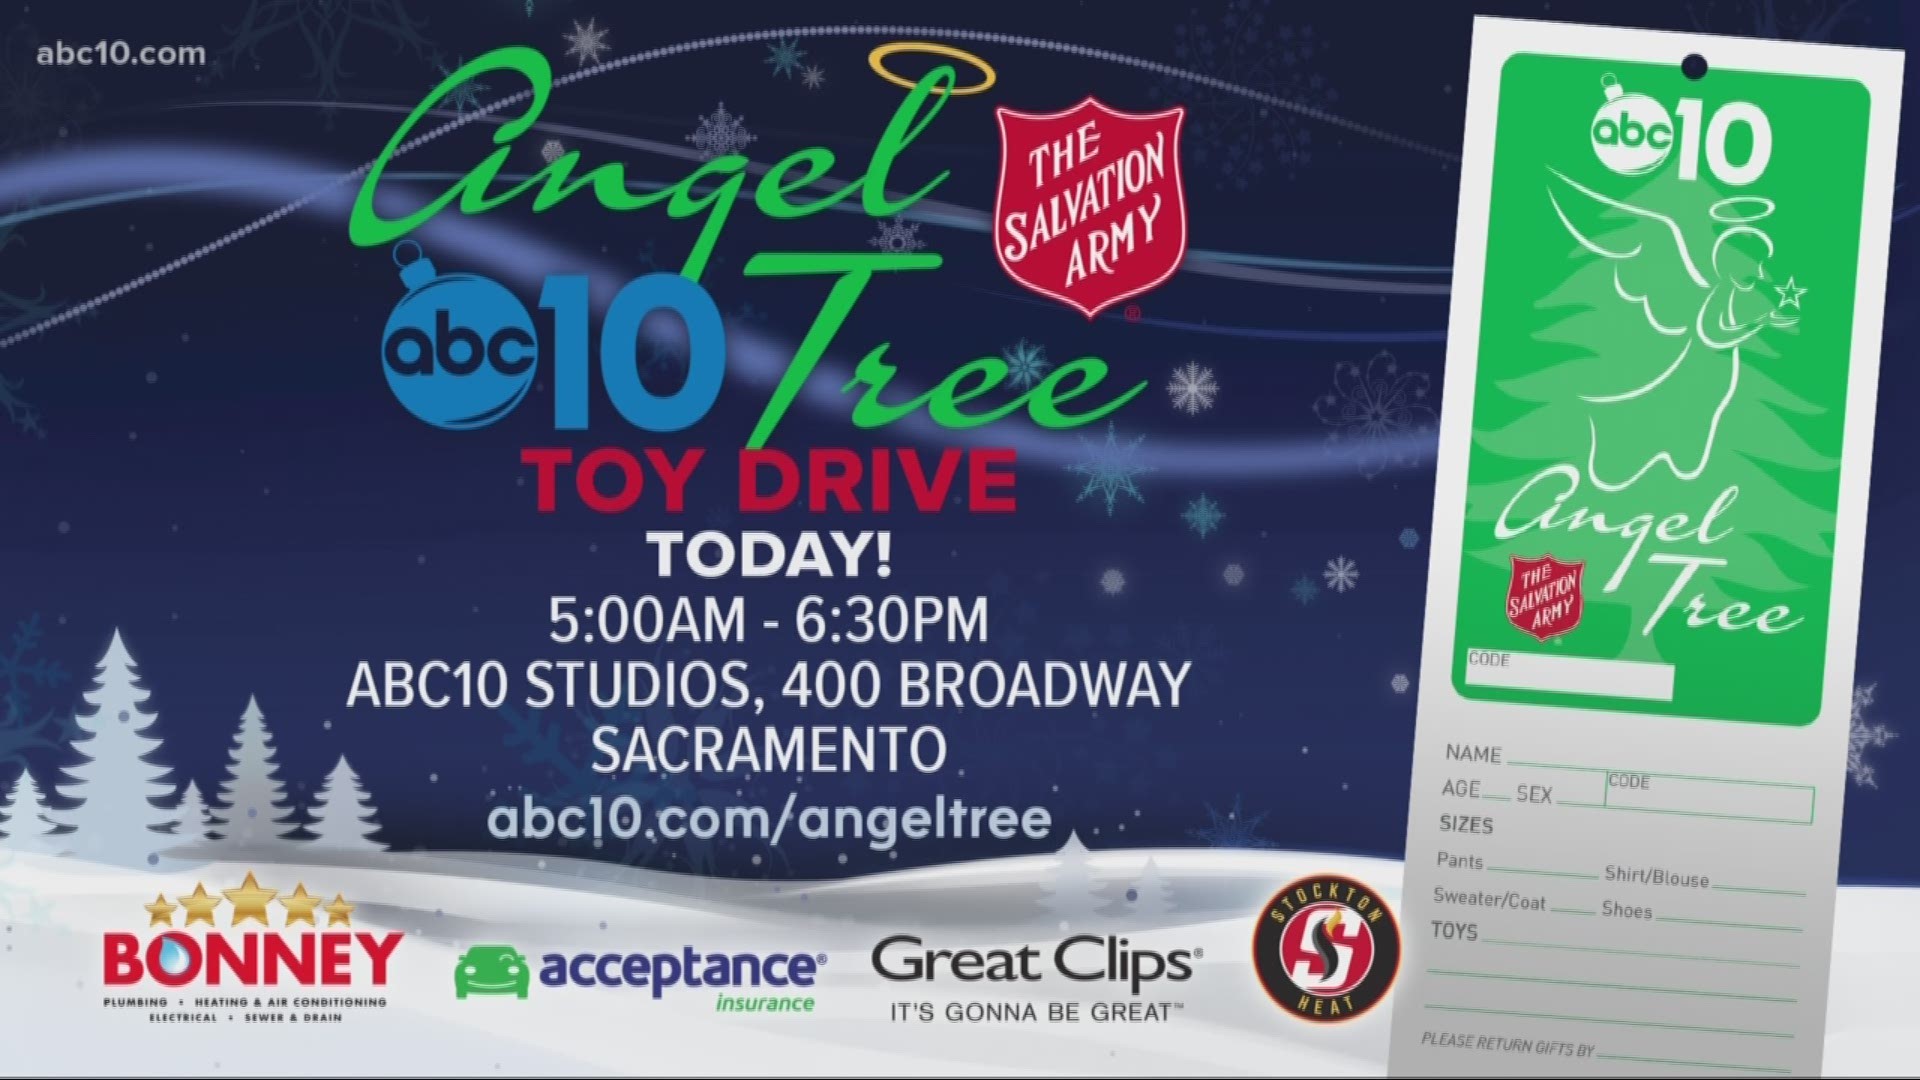 Yes, it's that time of year again. It's time for he Salvation Army's Angel Tree Toy Drive.